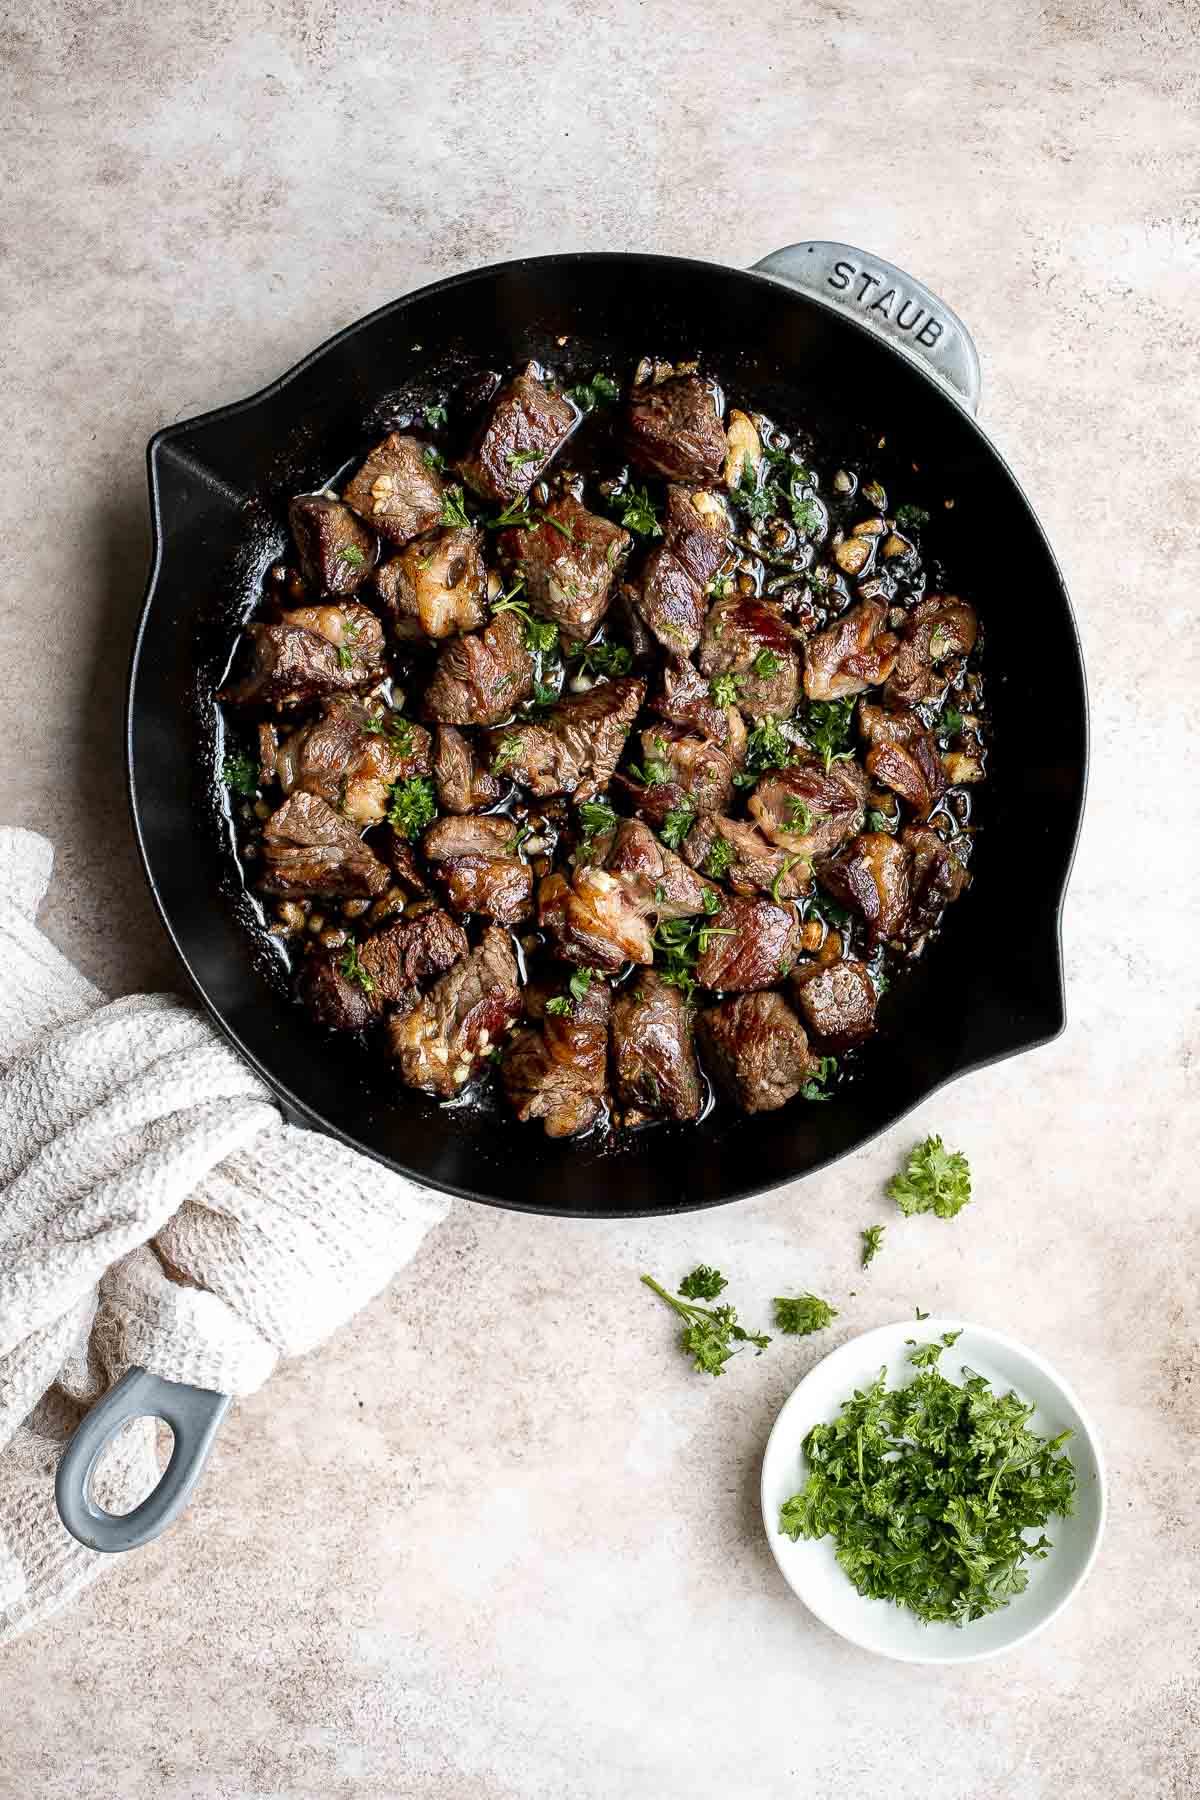 Garlic Butter Steak Bites are tender, juicy, and flavorful. This quick and easy appetizer or weeknight dinner takes just 15 minutes to make in one skillet. | aheadofthyme.com